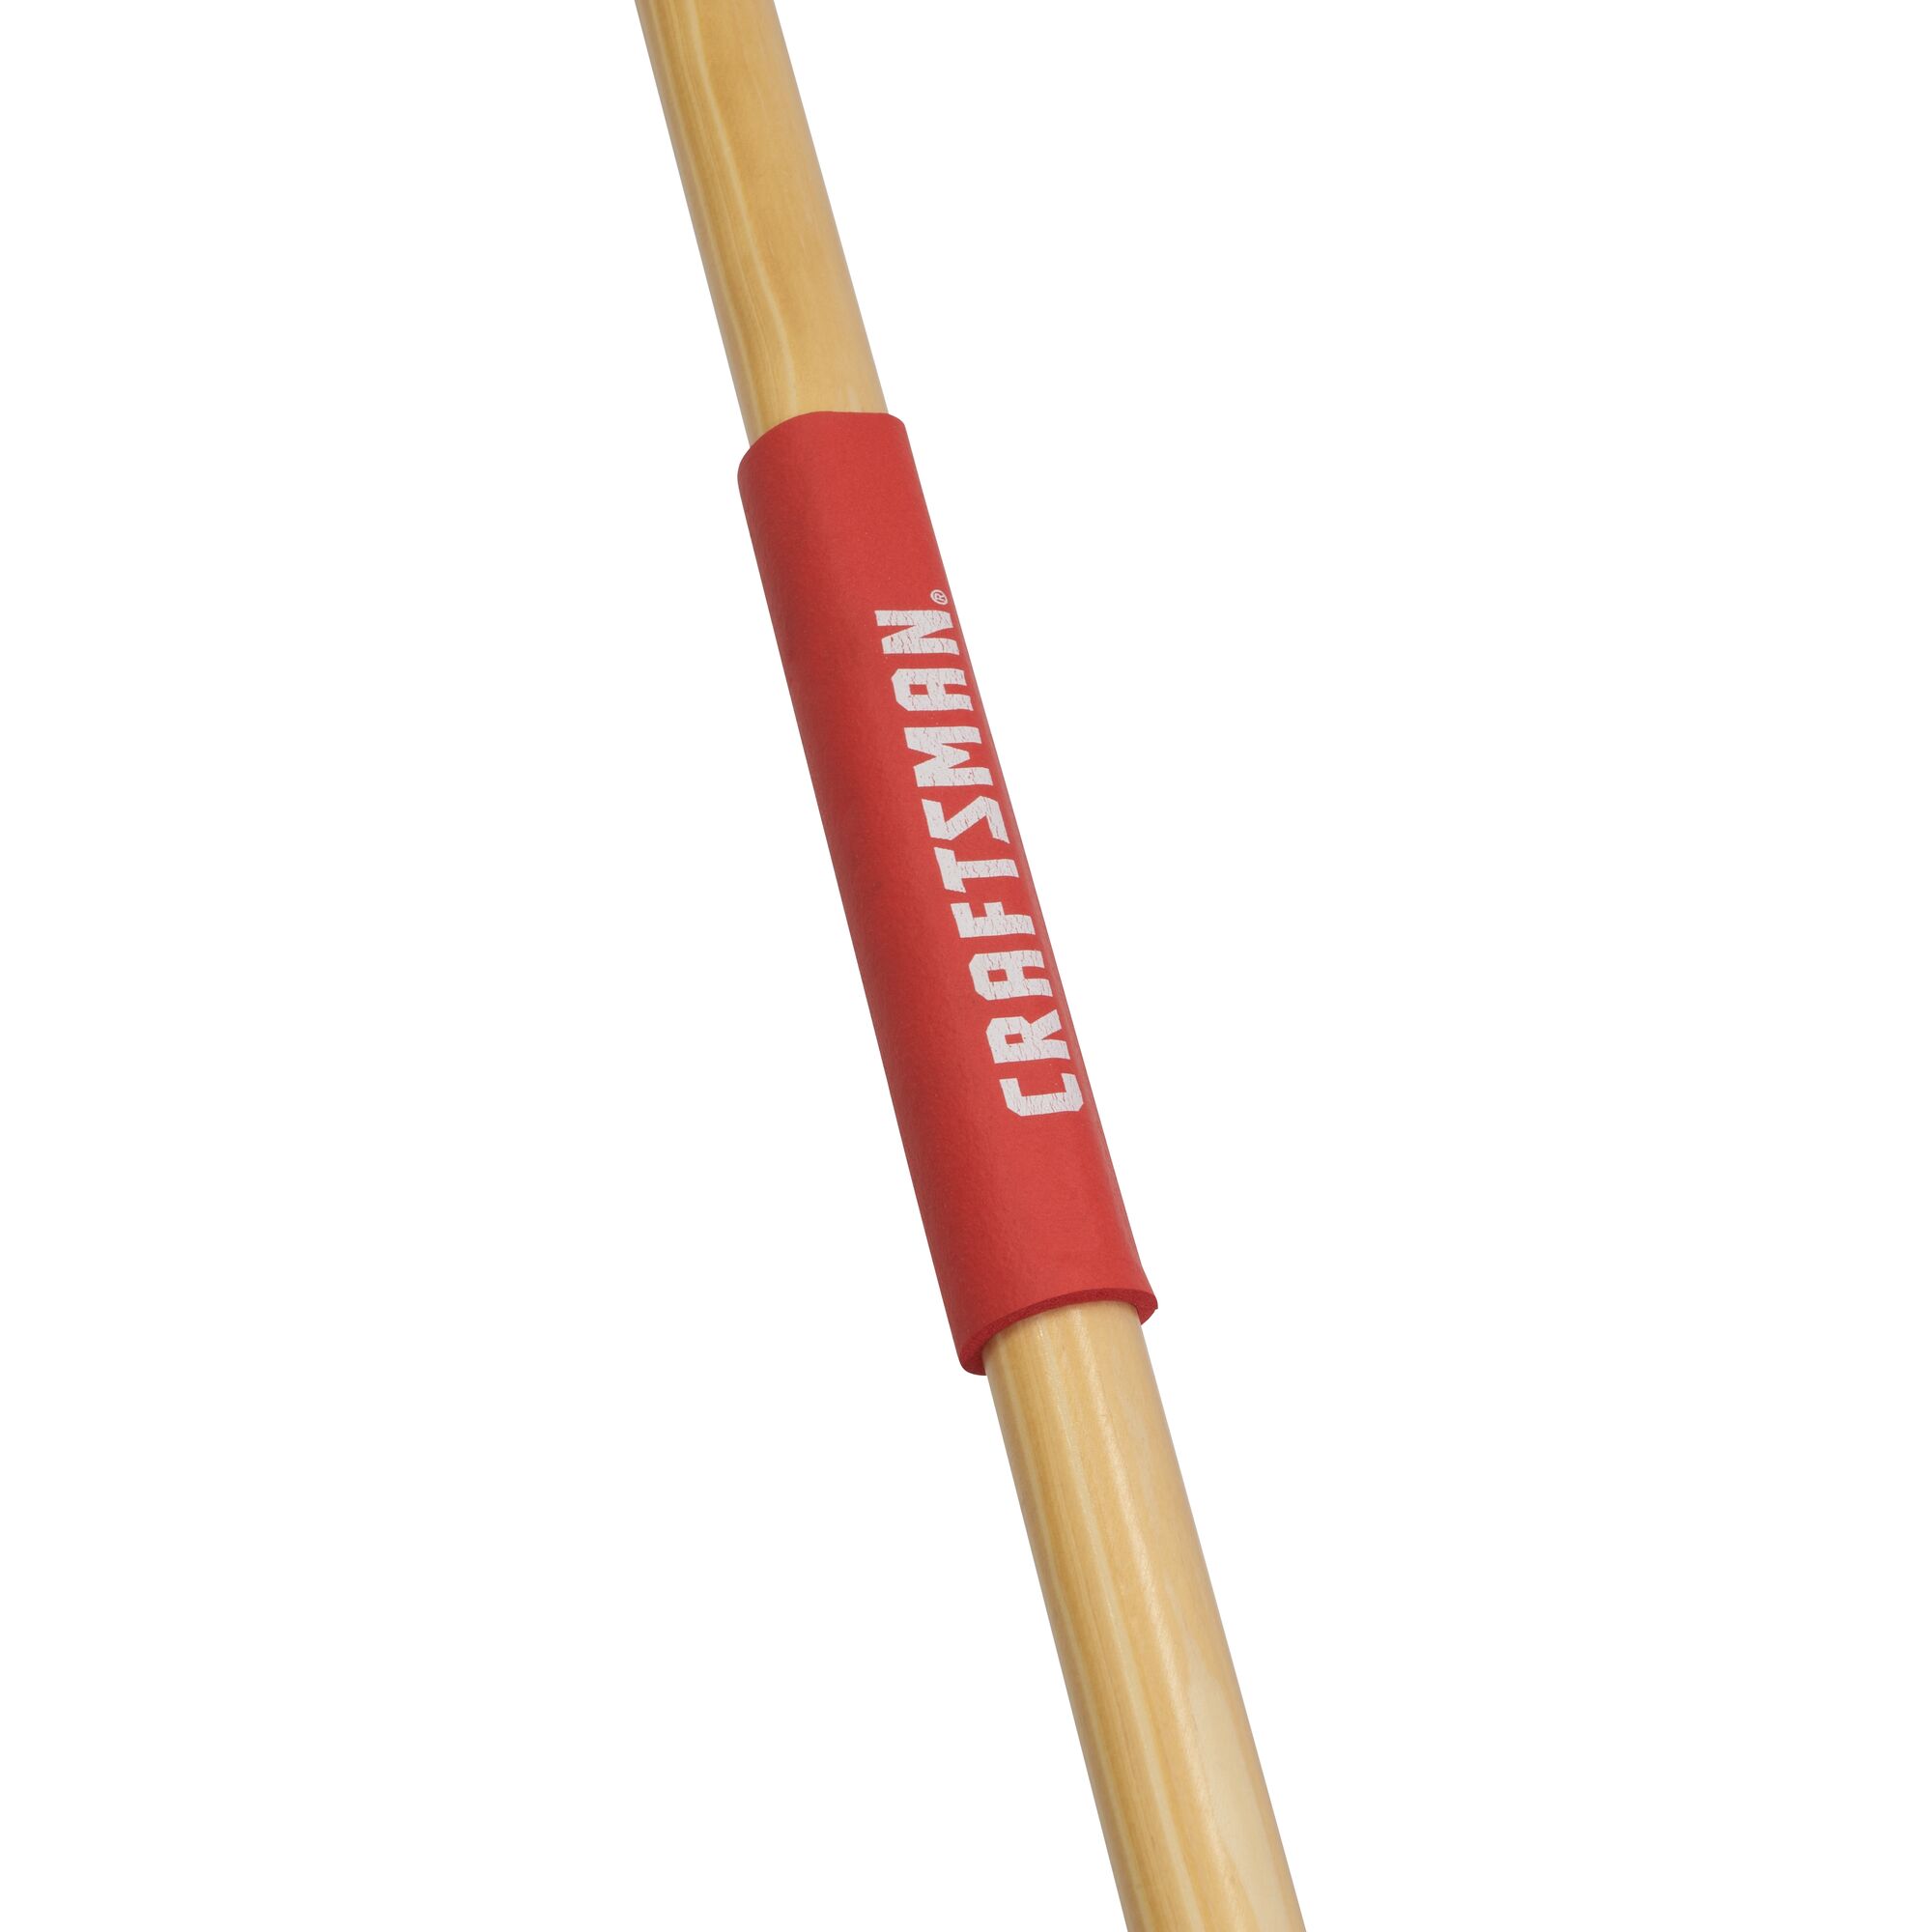 Hard wood handle feature in 24 inch shop and garage push broom.